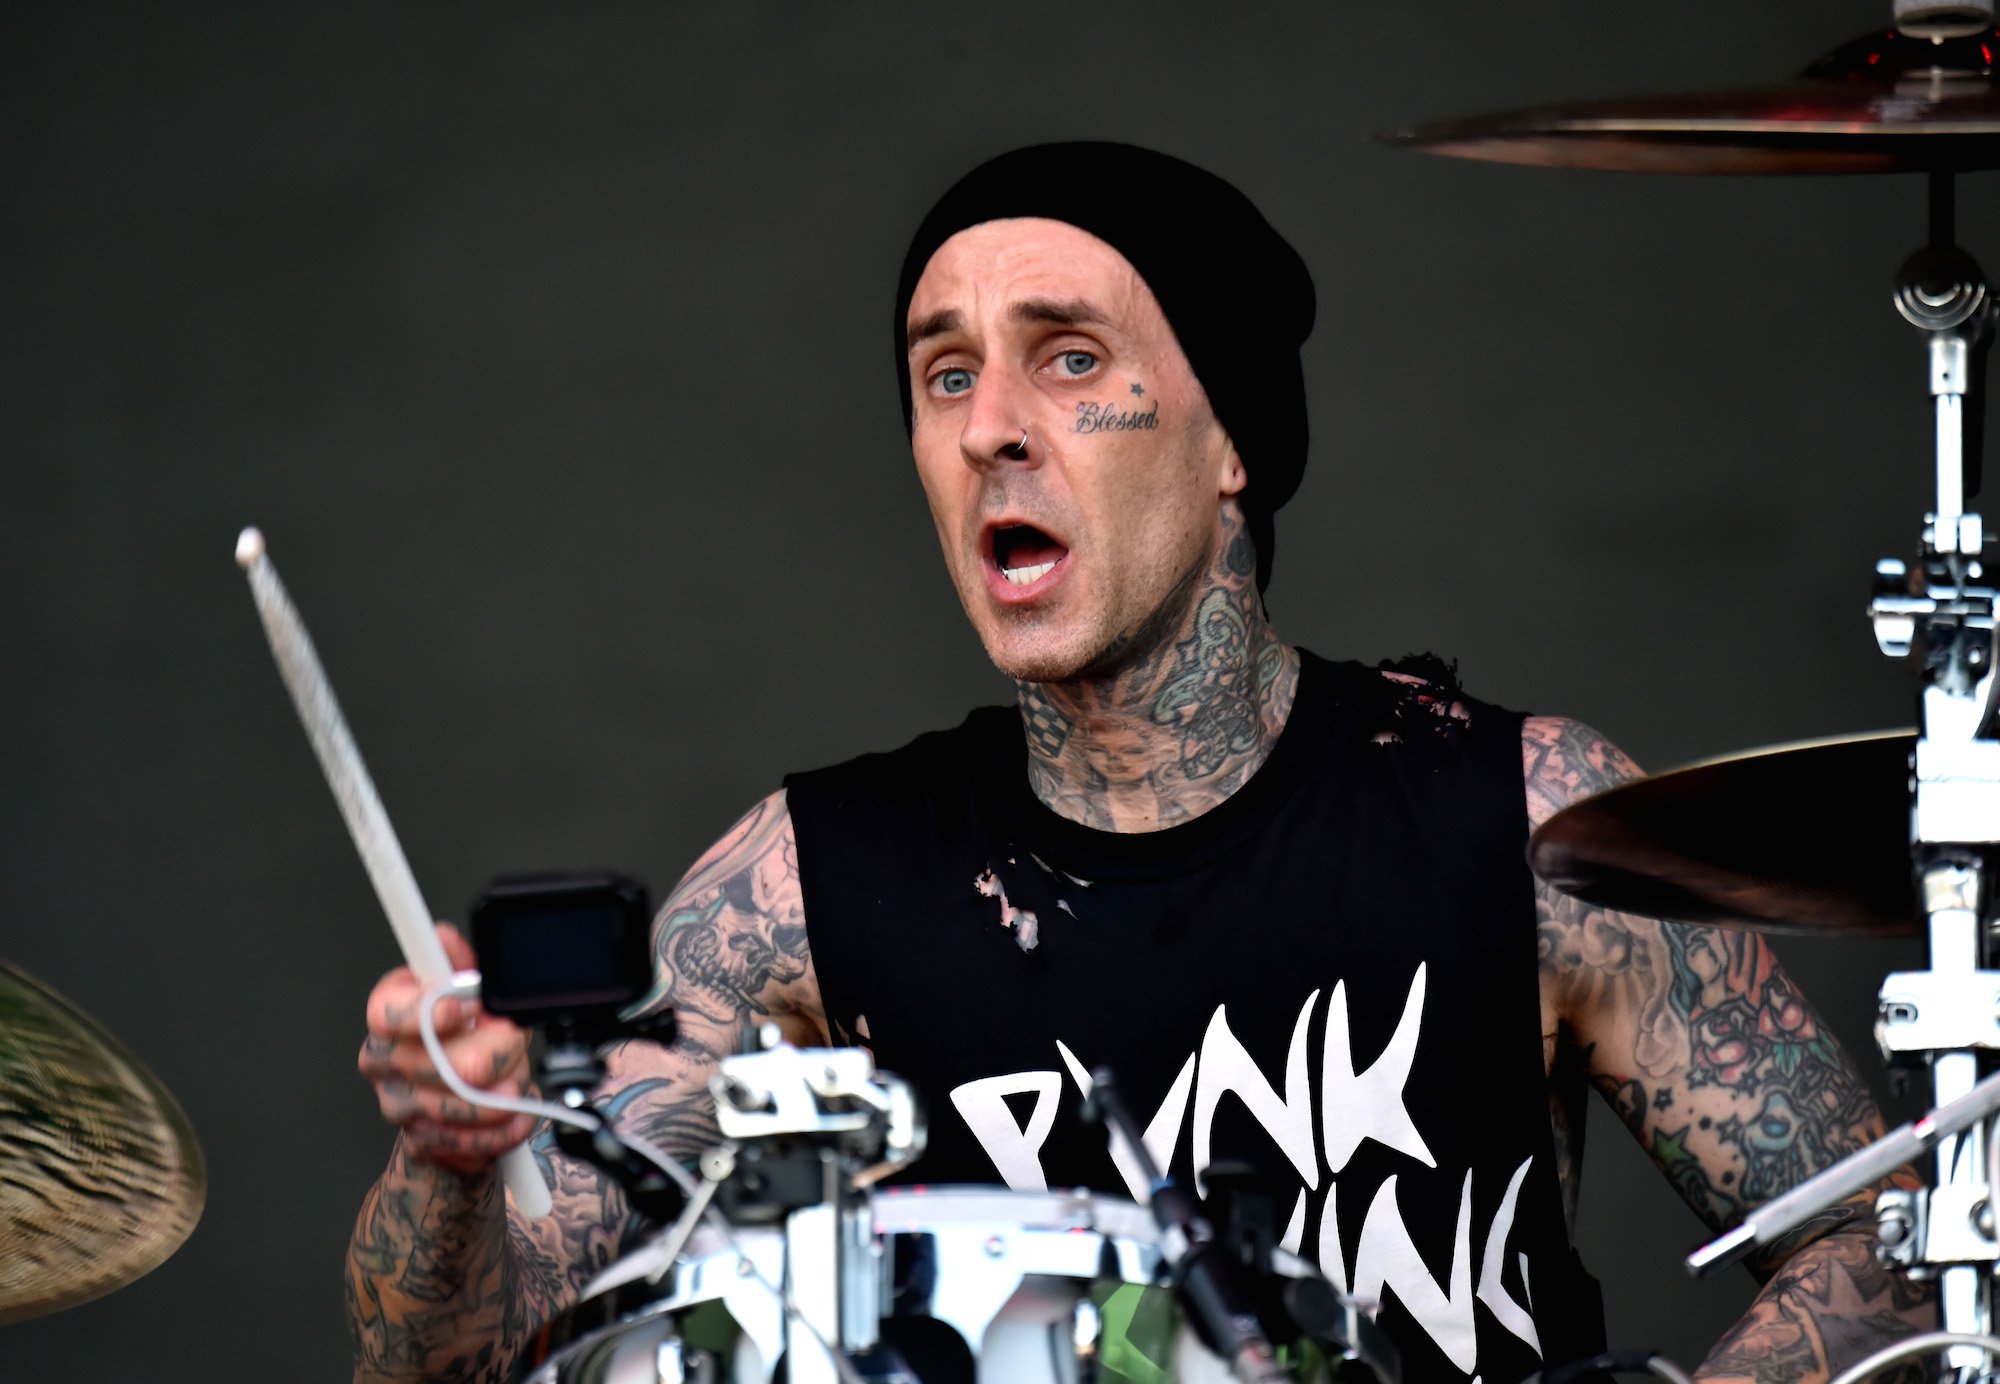 Travis Barker of Blink-182 performs onstage during the 2019 Outside Lands Music And Arts Festival